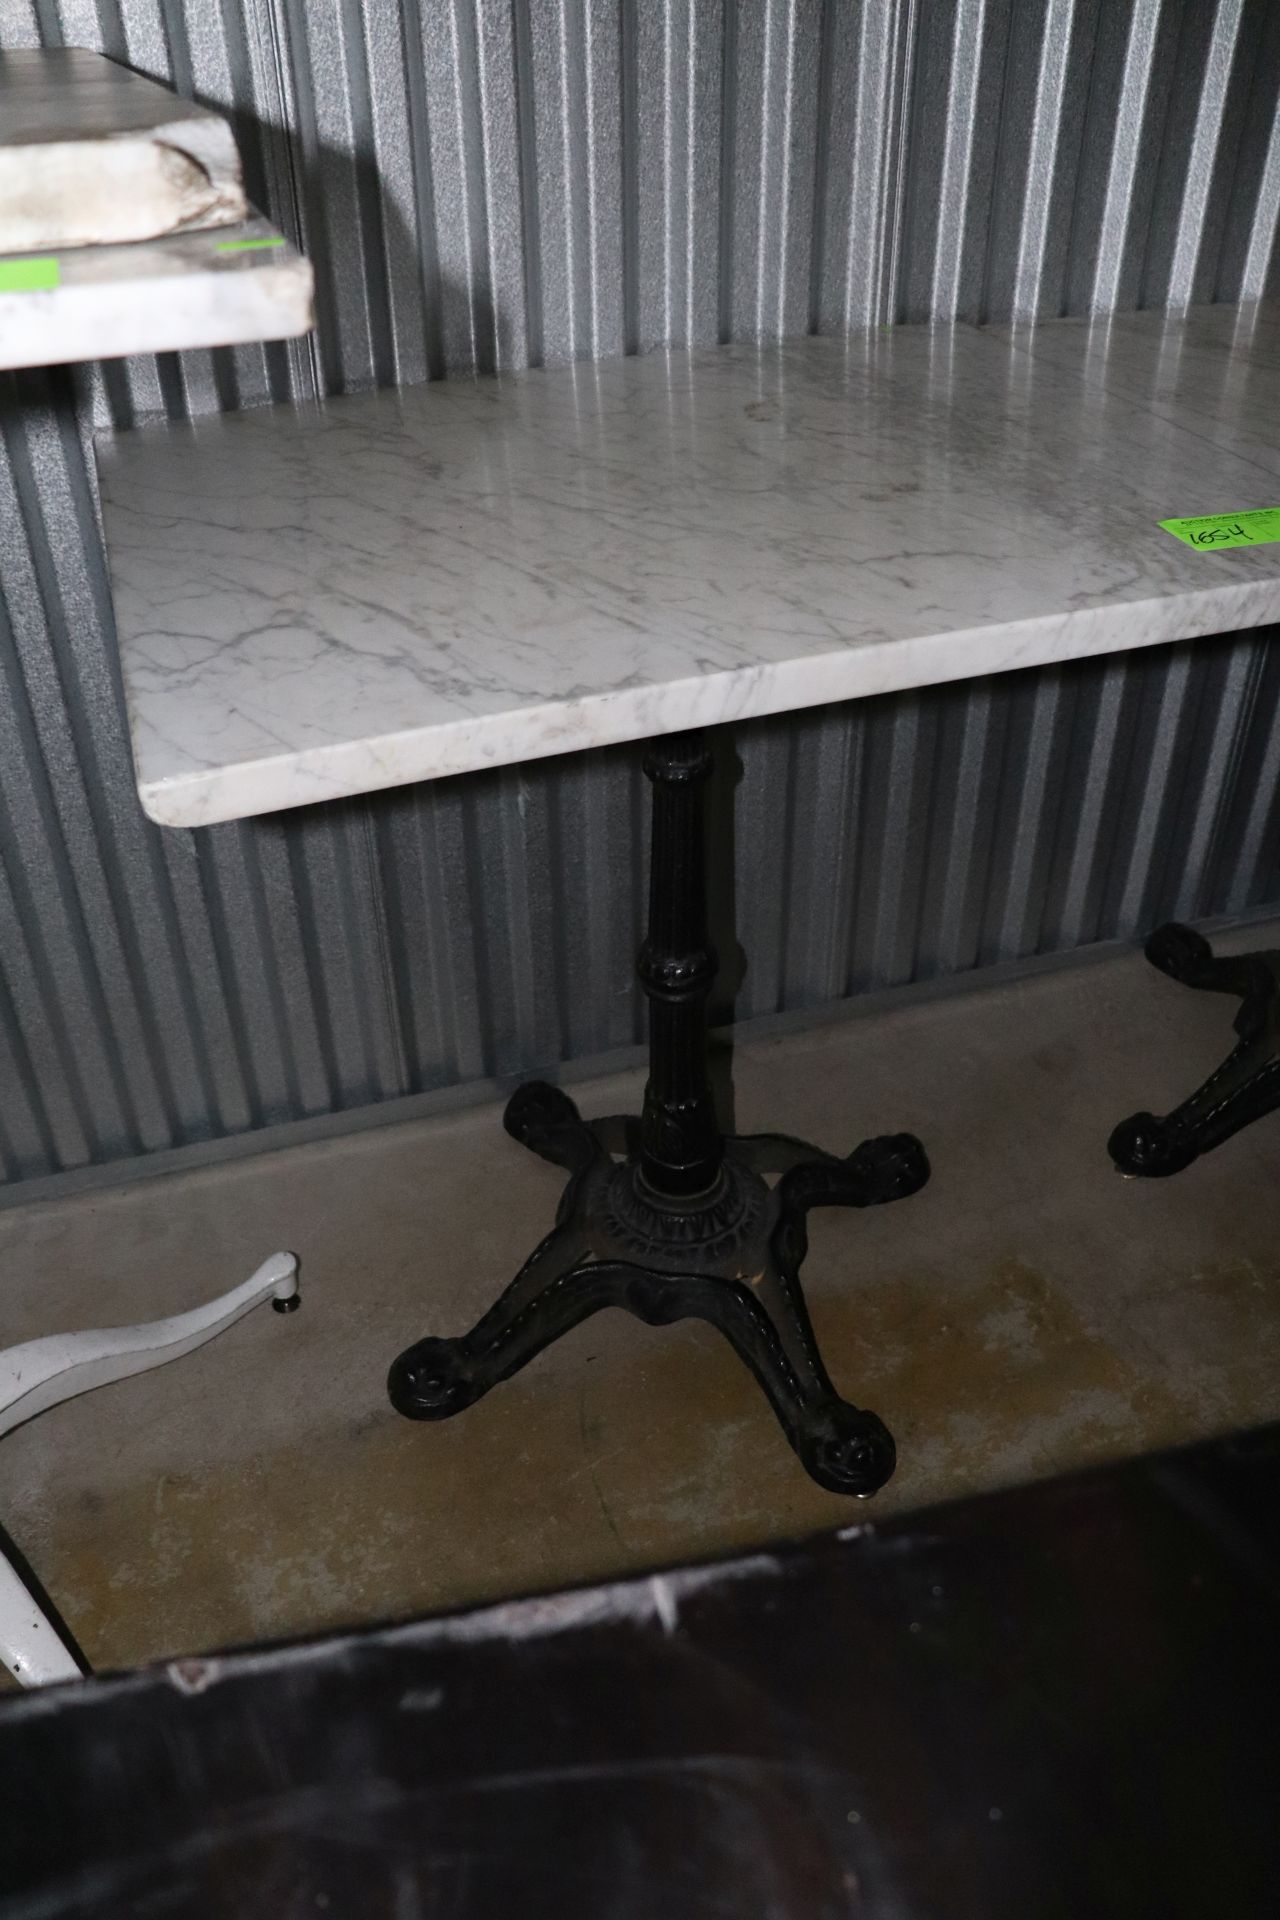 4 marble top tables 24"x30" and 30" tall